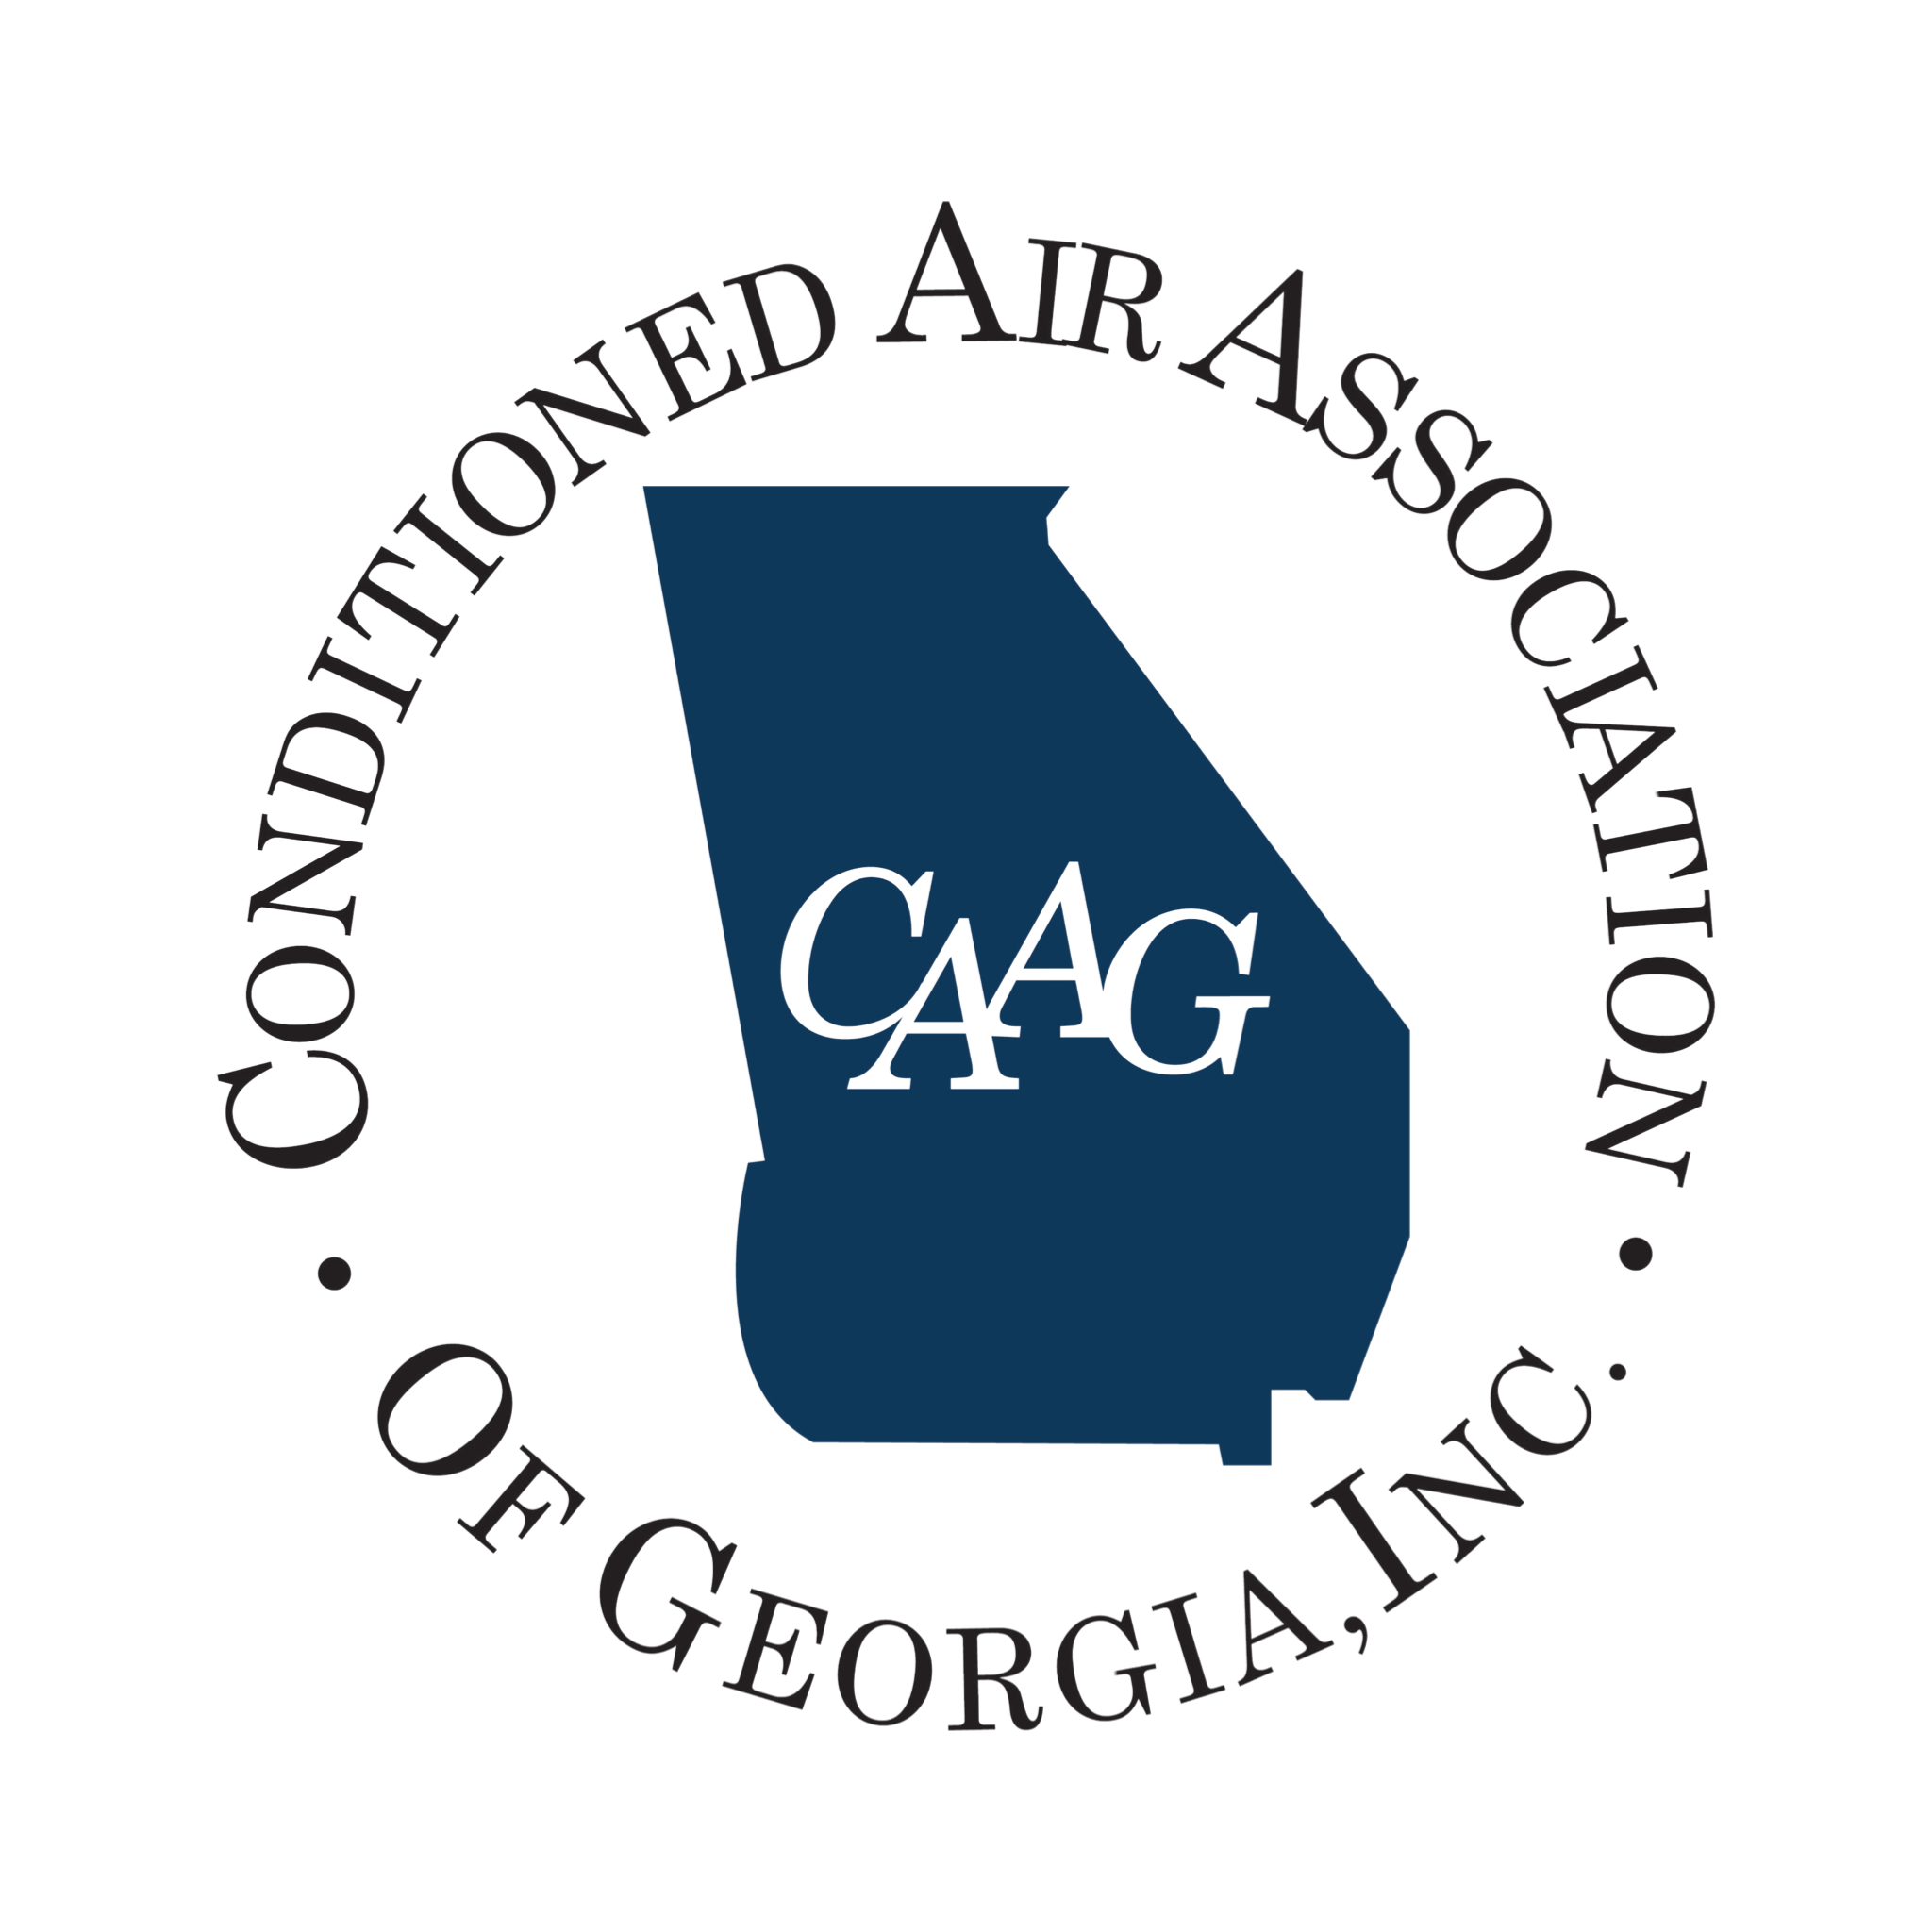 Conditioned Air Association of Georgia (CAAG) Splash Page